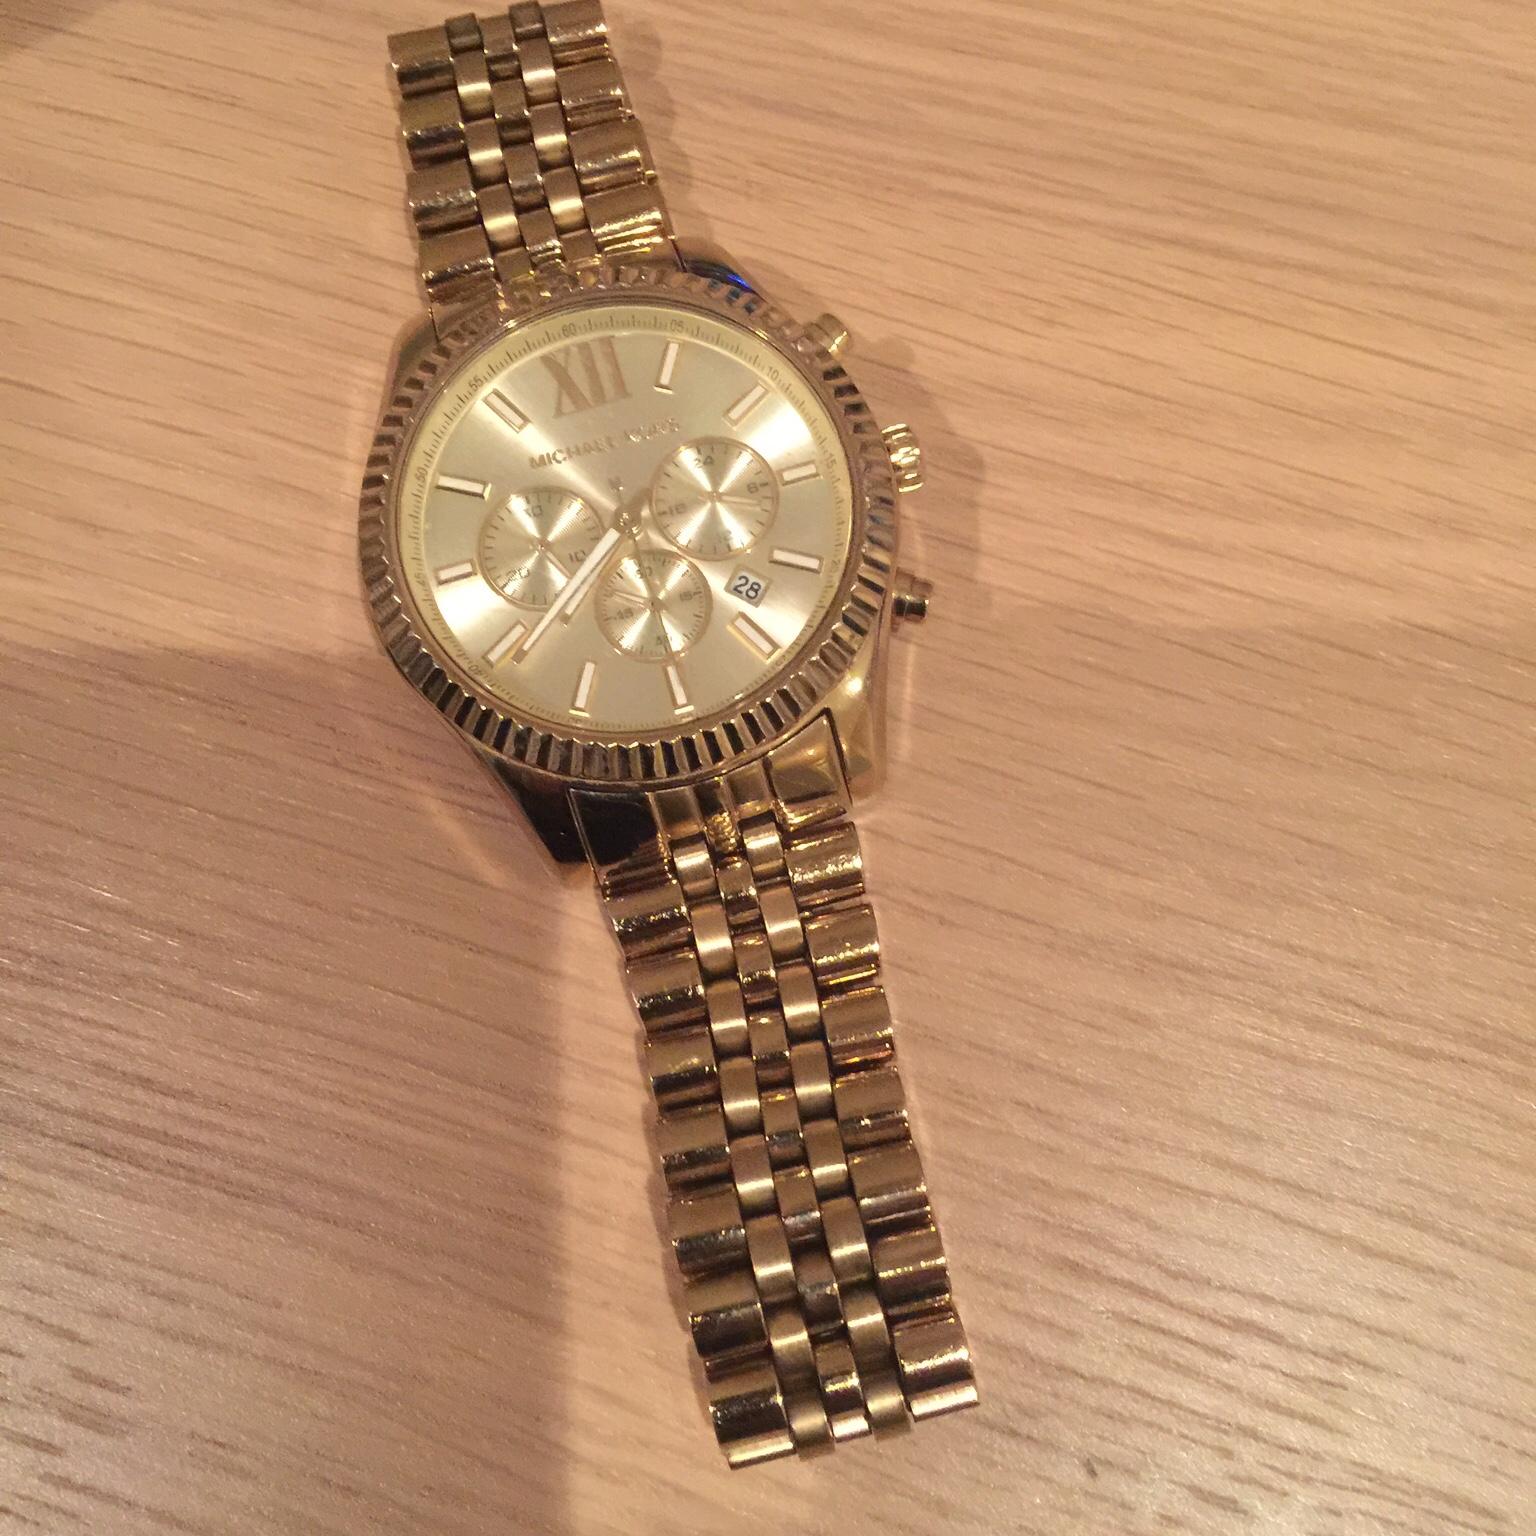 where to sell michael kors watch